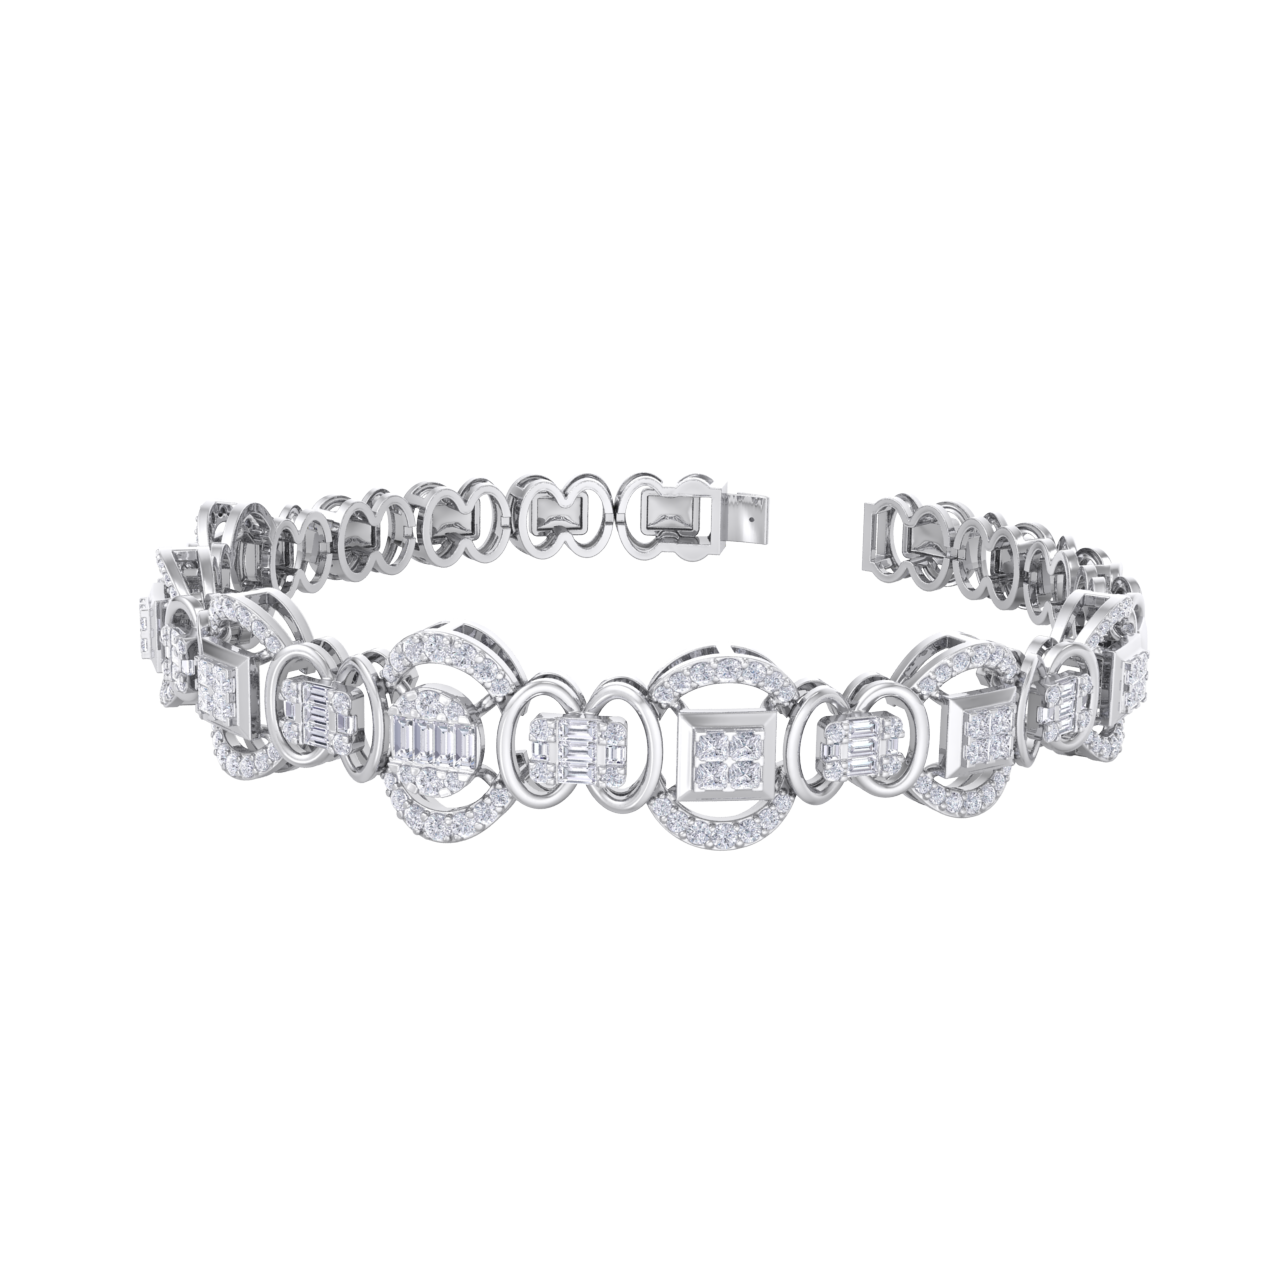 Statement bracelet in white gold with white diamonds of 1.77 ct in weight